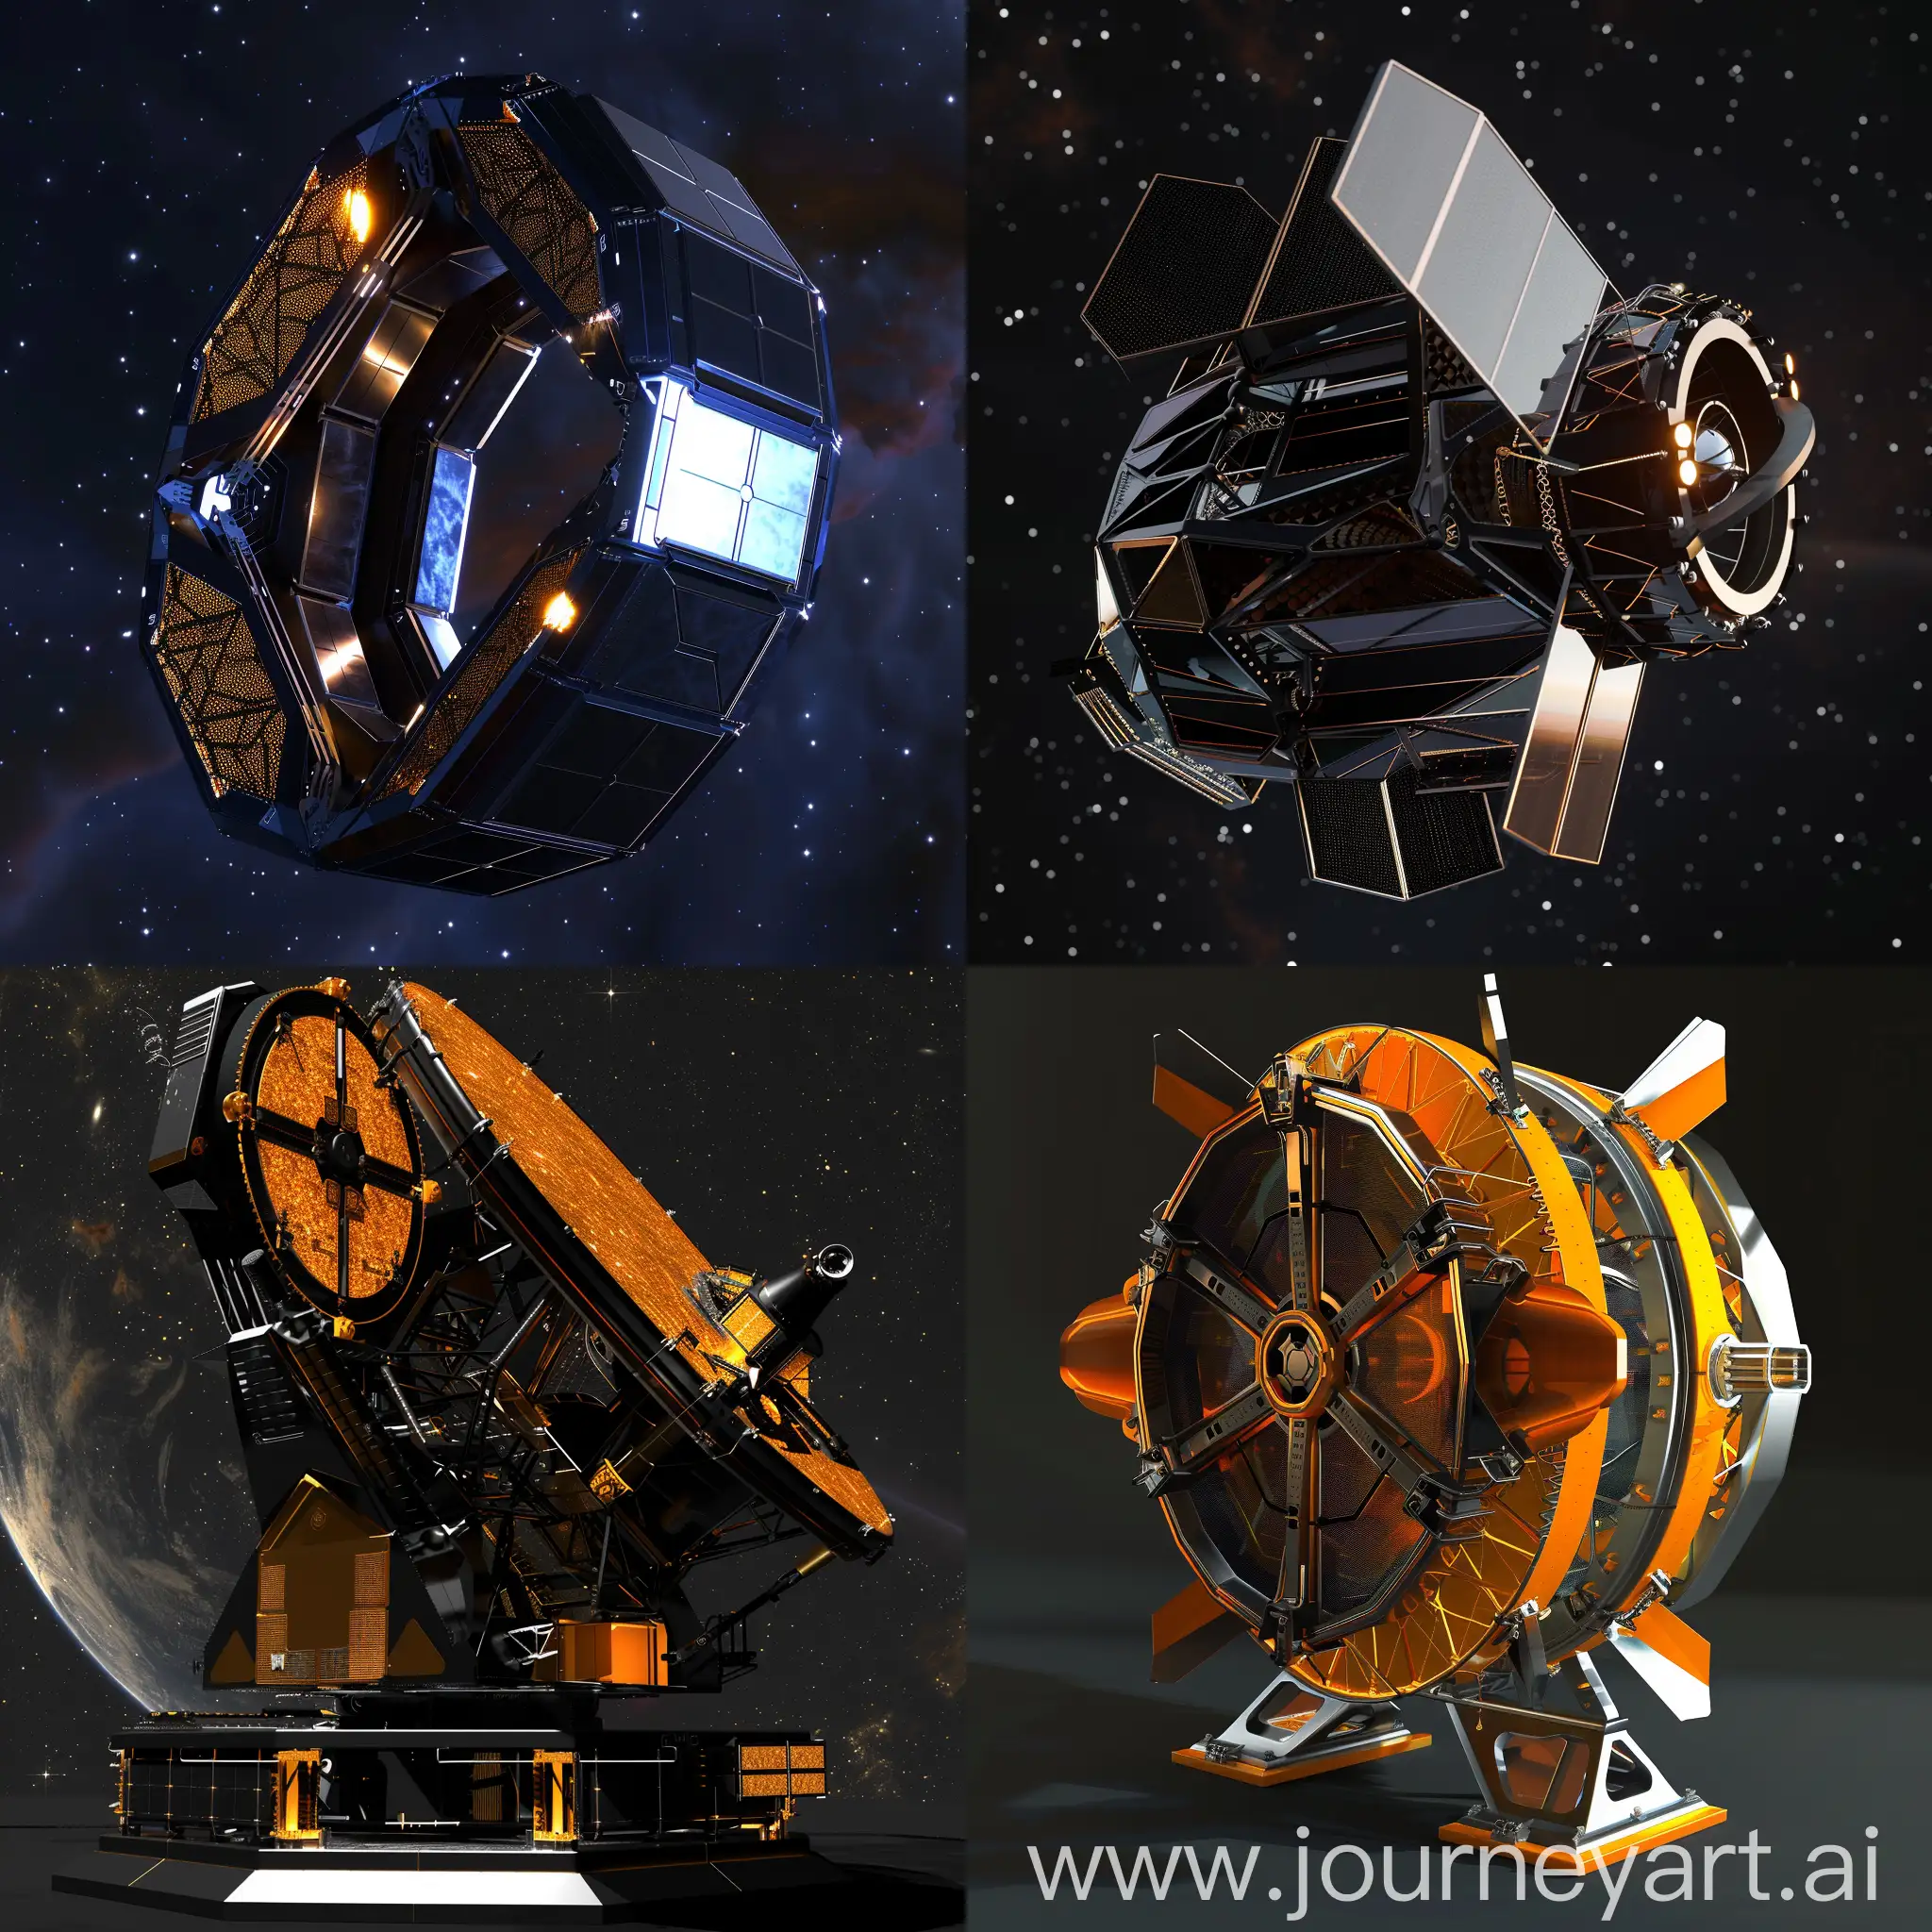 Futuristic space telescope, Adaptive Optics, Ultra-Lightweight Materials, Advanced Cooling Systems, High-Resolution Detector, Quantum Communication, Artificial Intelligence, Nano-structured Coatings, Modular Design, Energy Harvesting, Spectroscopy Enhancements, Solar Panel Wings, Micrometeoroid Shielding, Thermal Control Coating, Communication Arrays, Robotic Arms, Star Trackers, Propulsion System, Sunshade, Docking Ports, Variable Geometry, in technological style, in progressive style, in dynamic style, in speed style, in unreal engine 5 style --stylize 1000